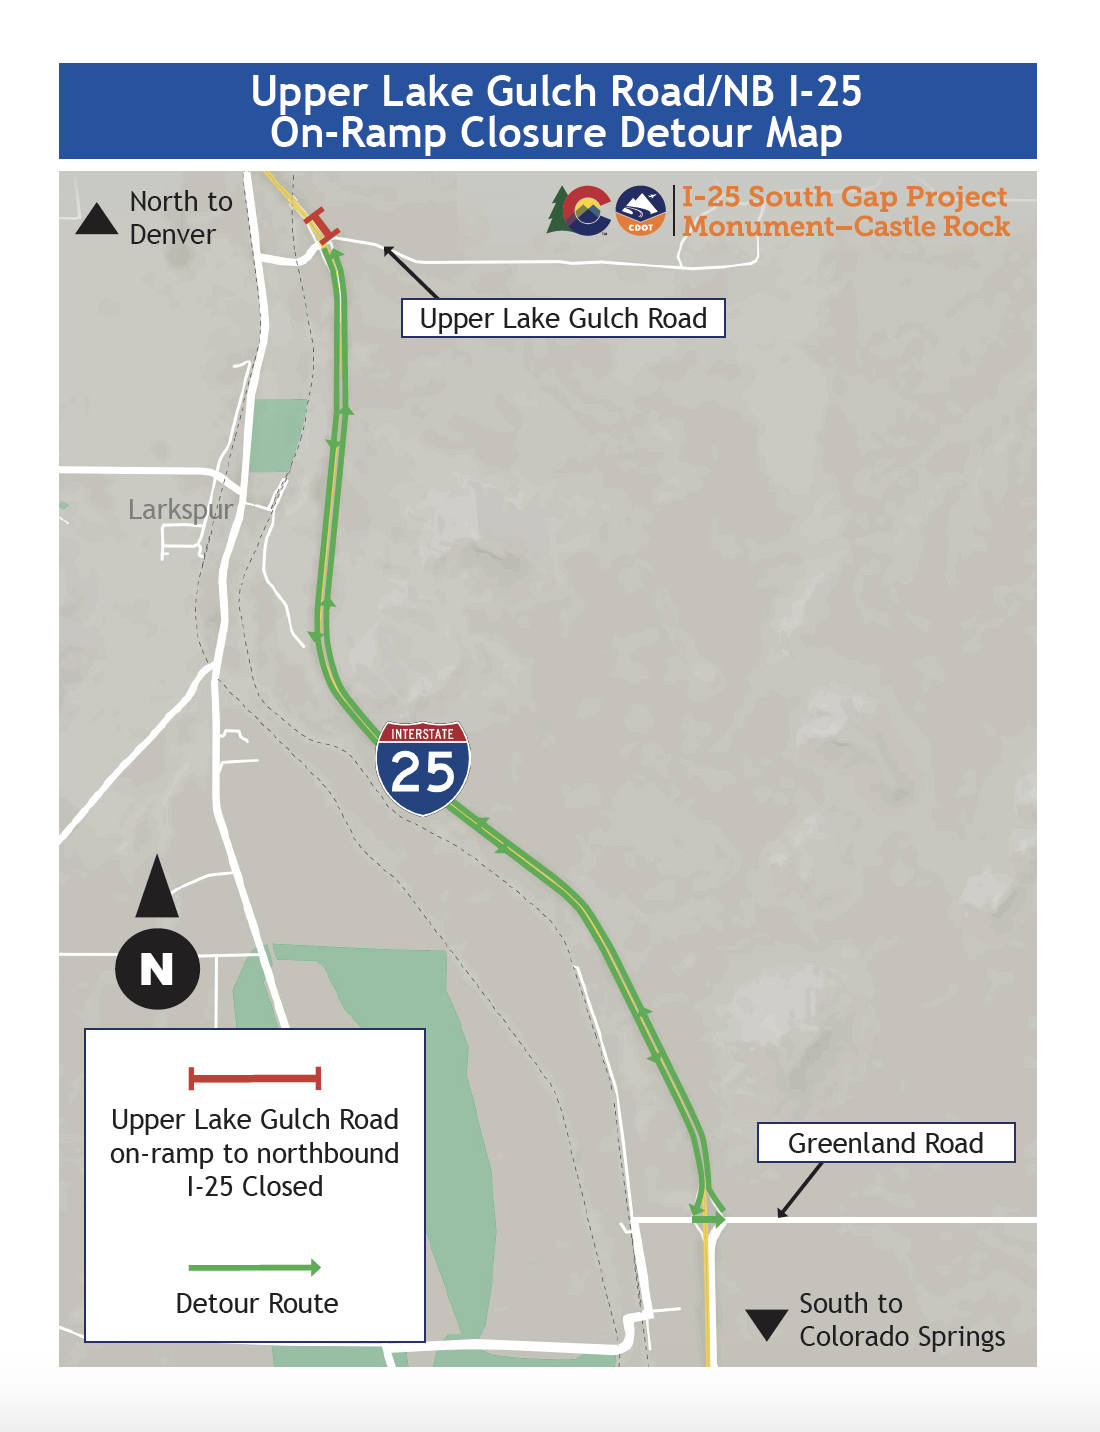 Upper Lake Gulch Road On-Ramp to Northbound I-25 closure map detail image